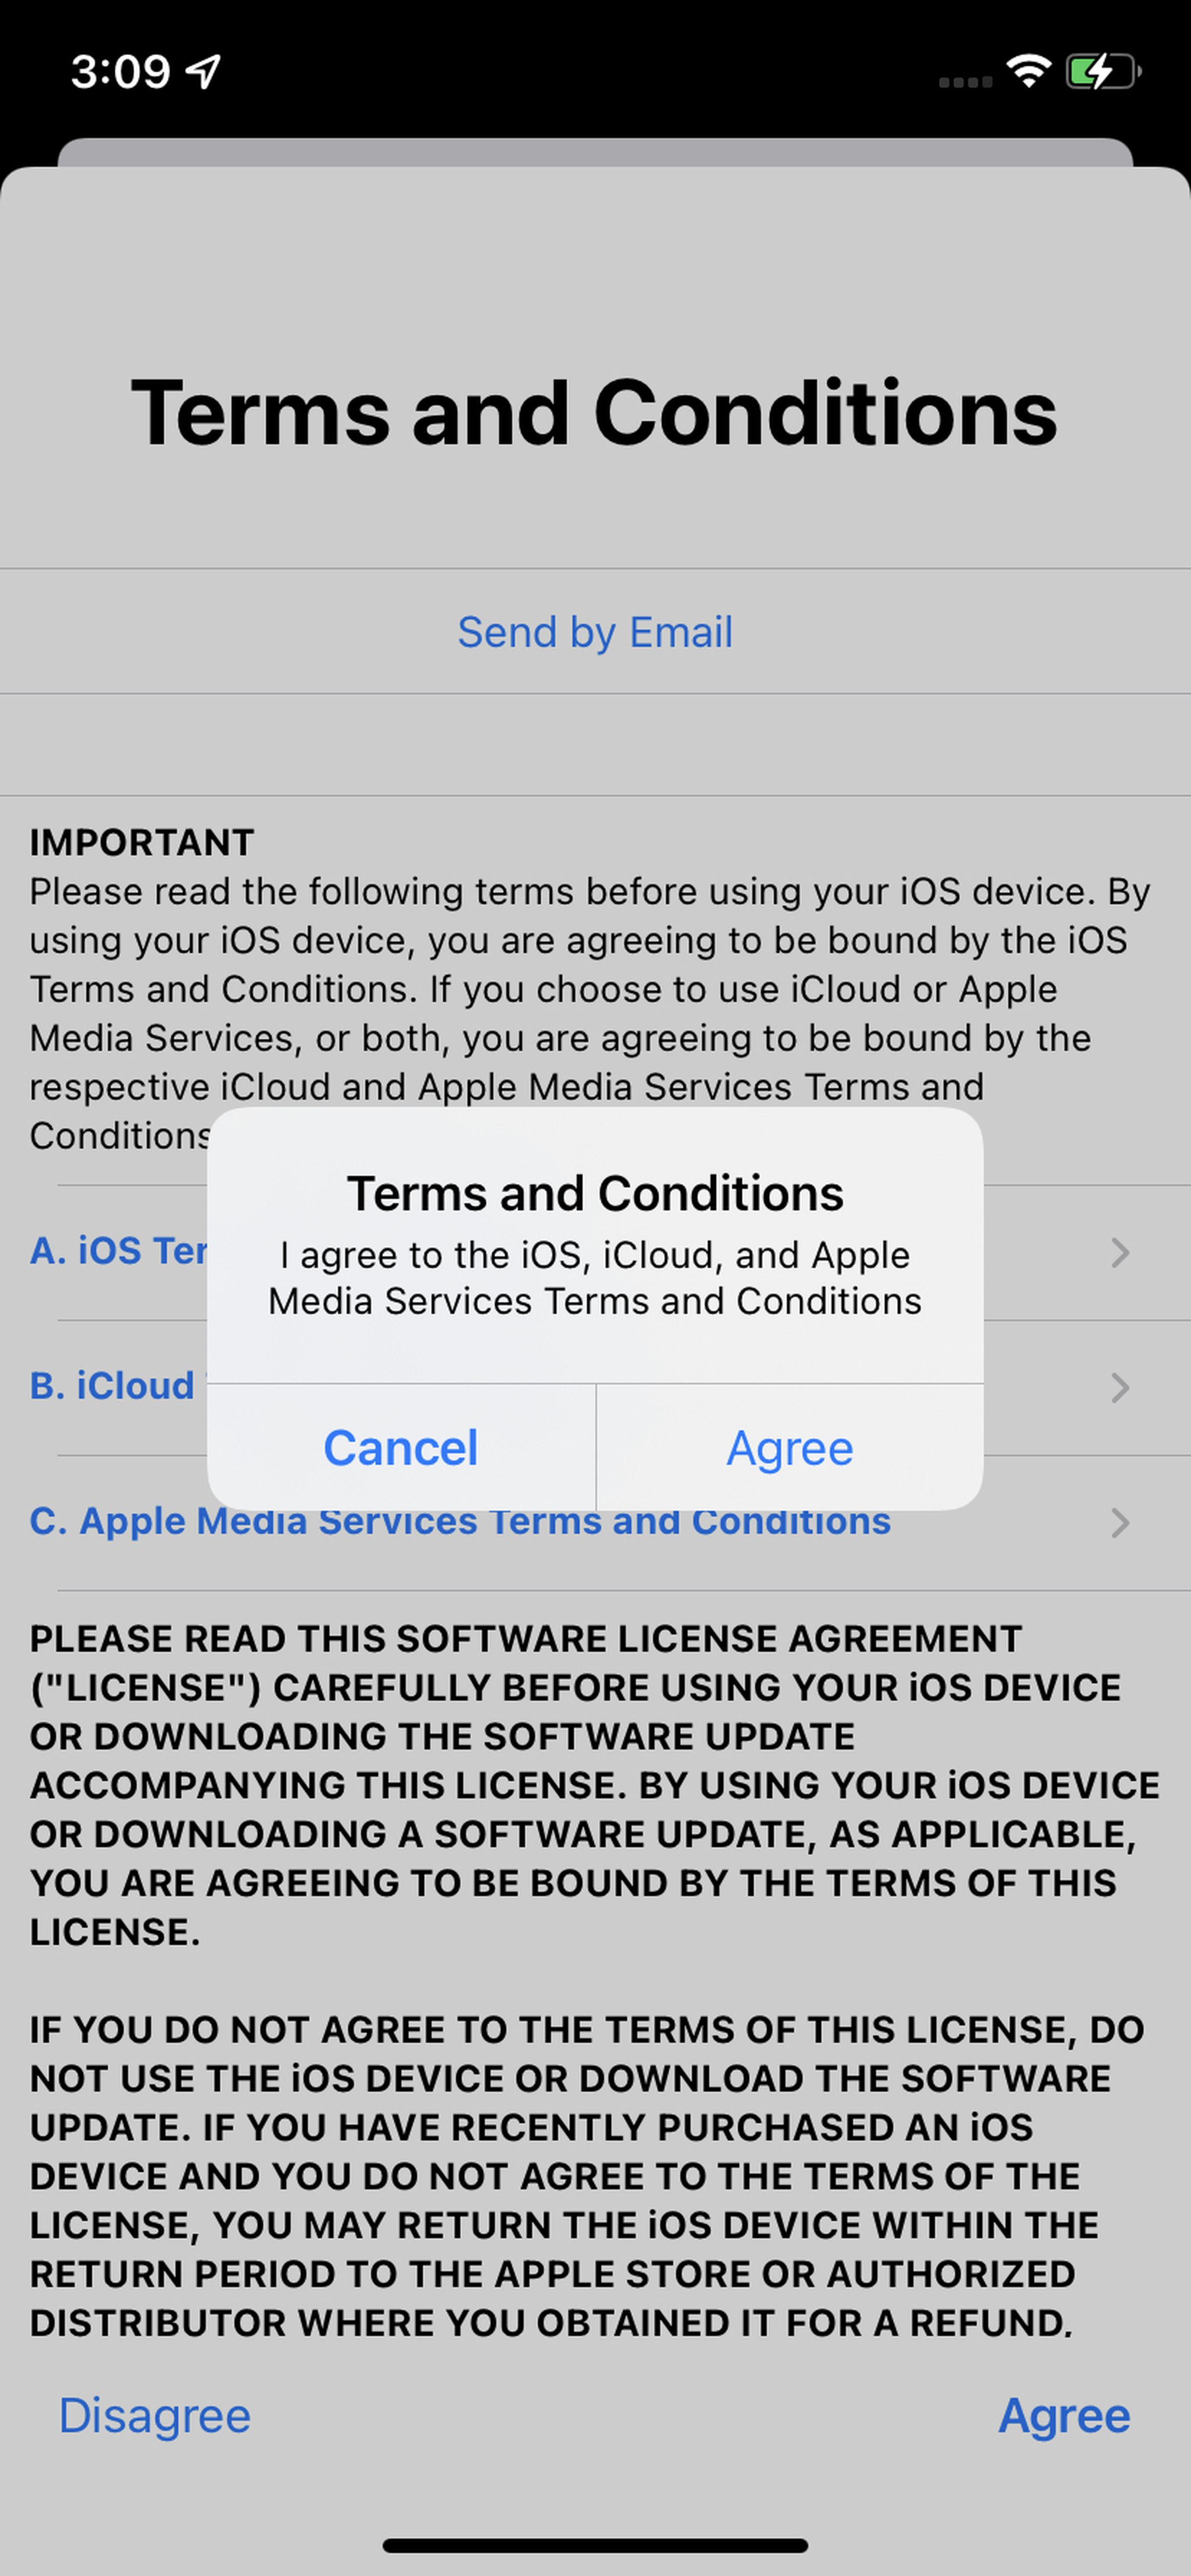 You’ll have to agree to Apple’s “Terms and Conditions.” 